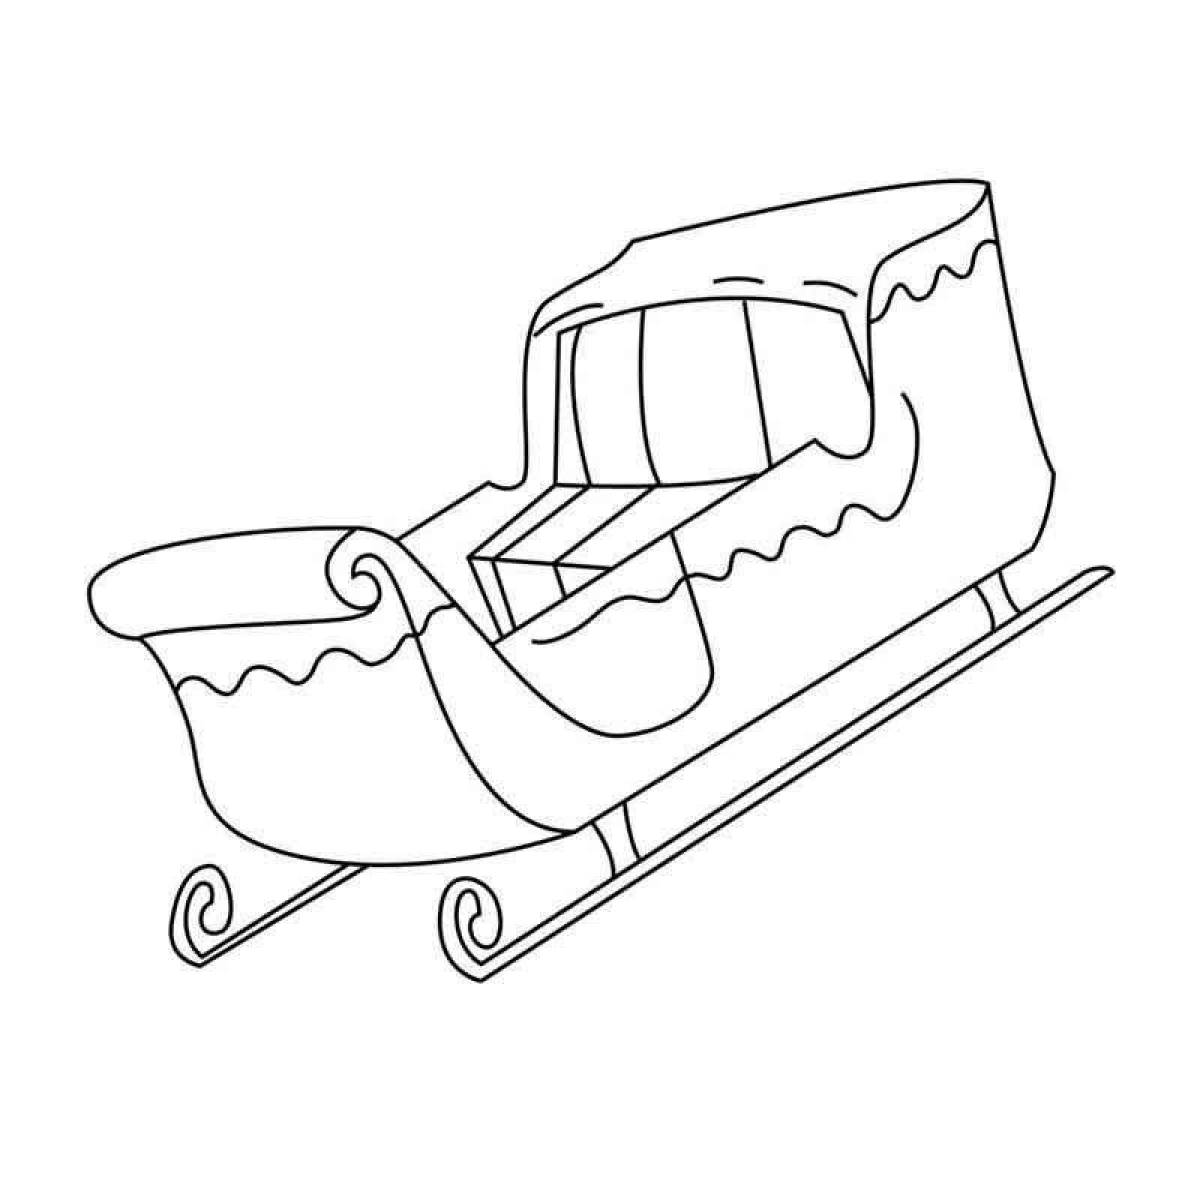 Animated sleigh coloring for kids